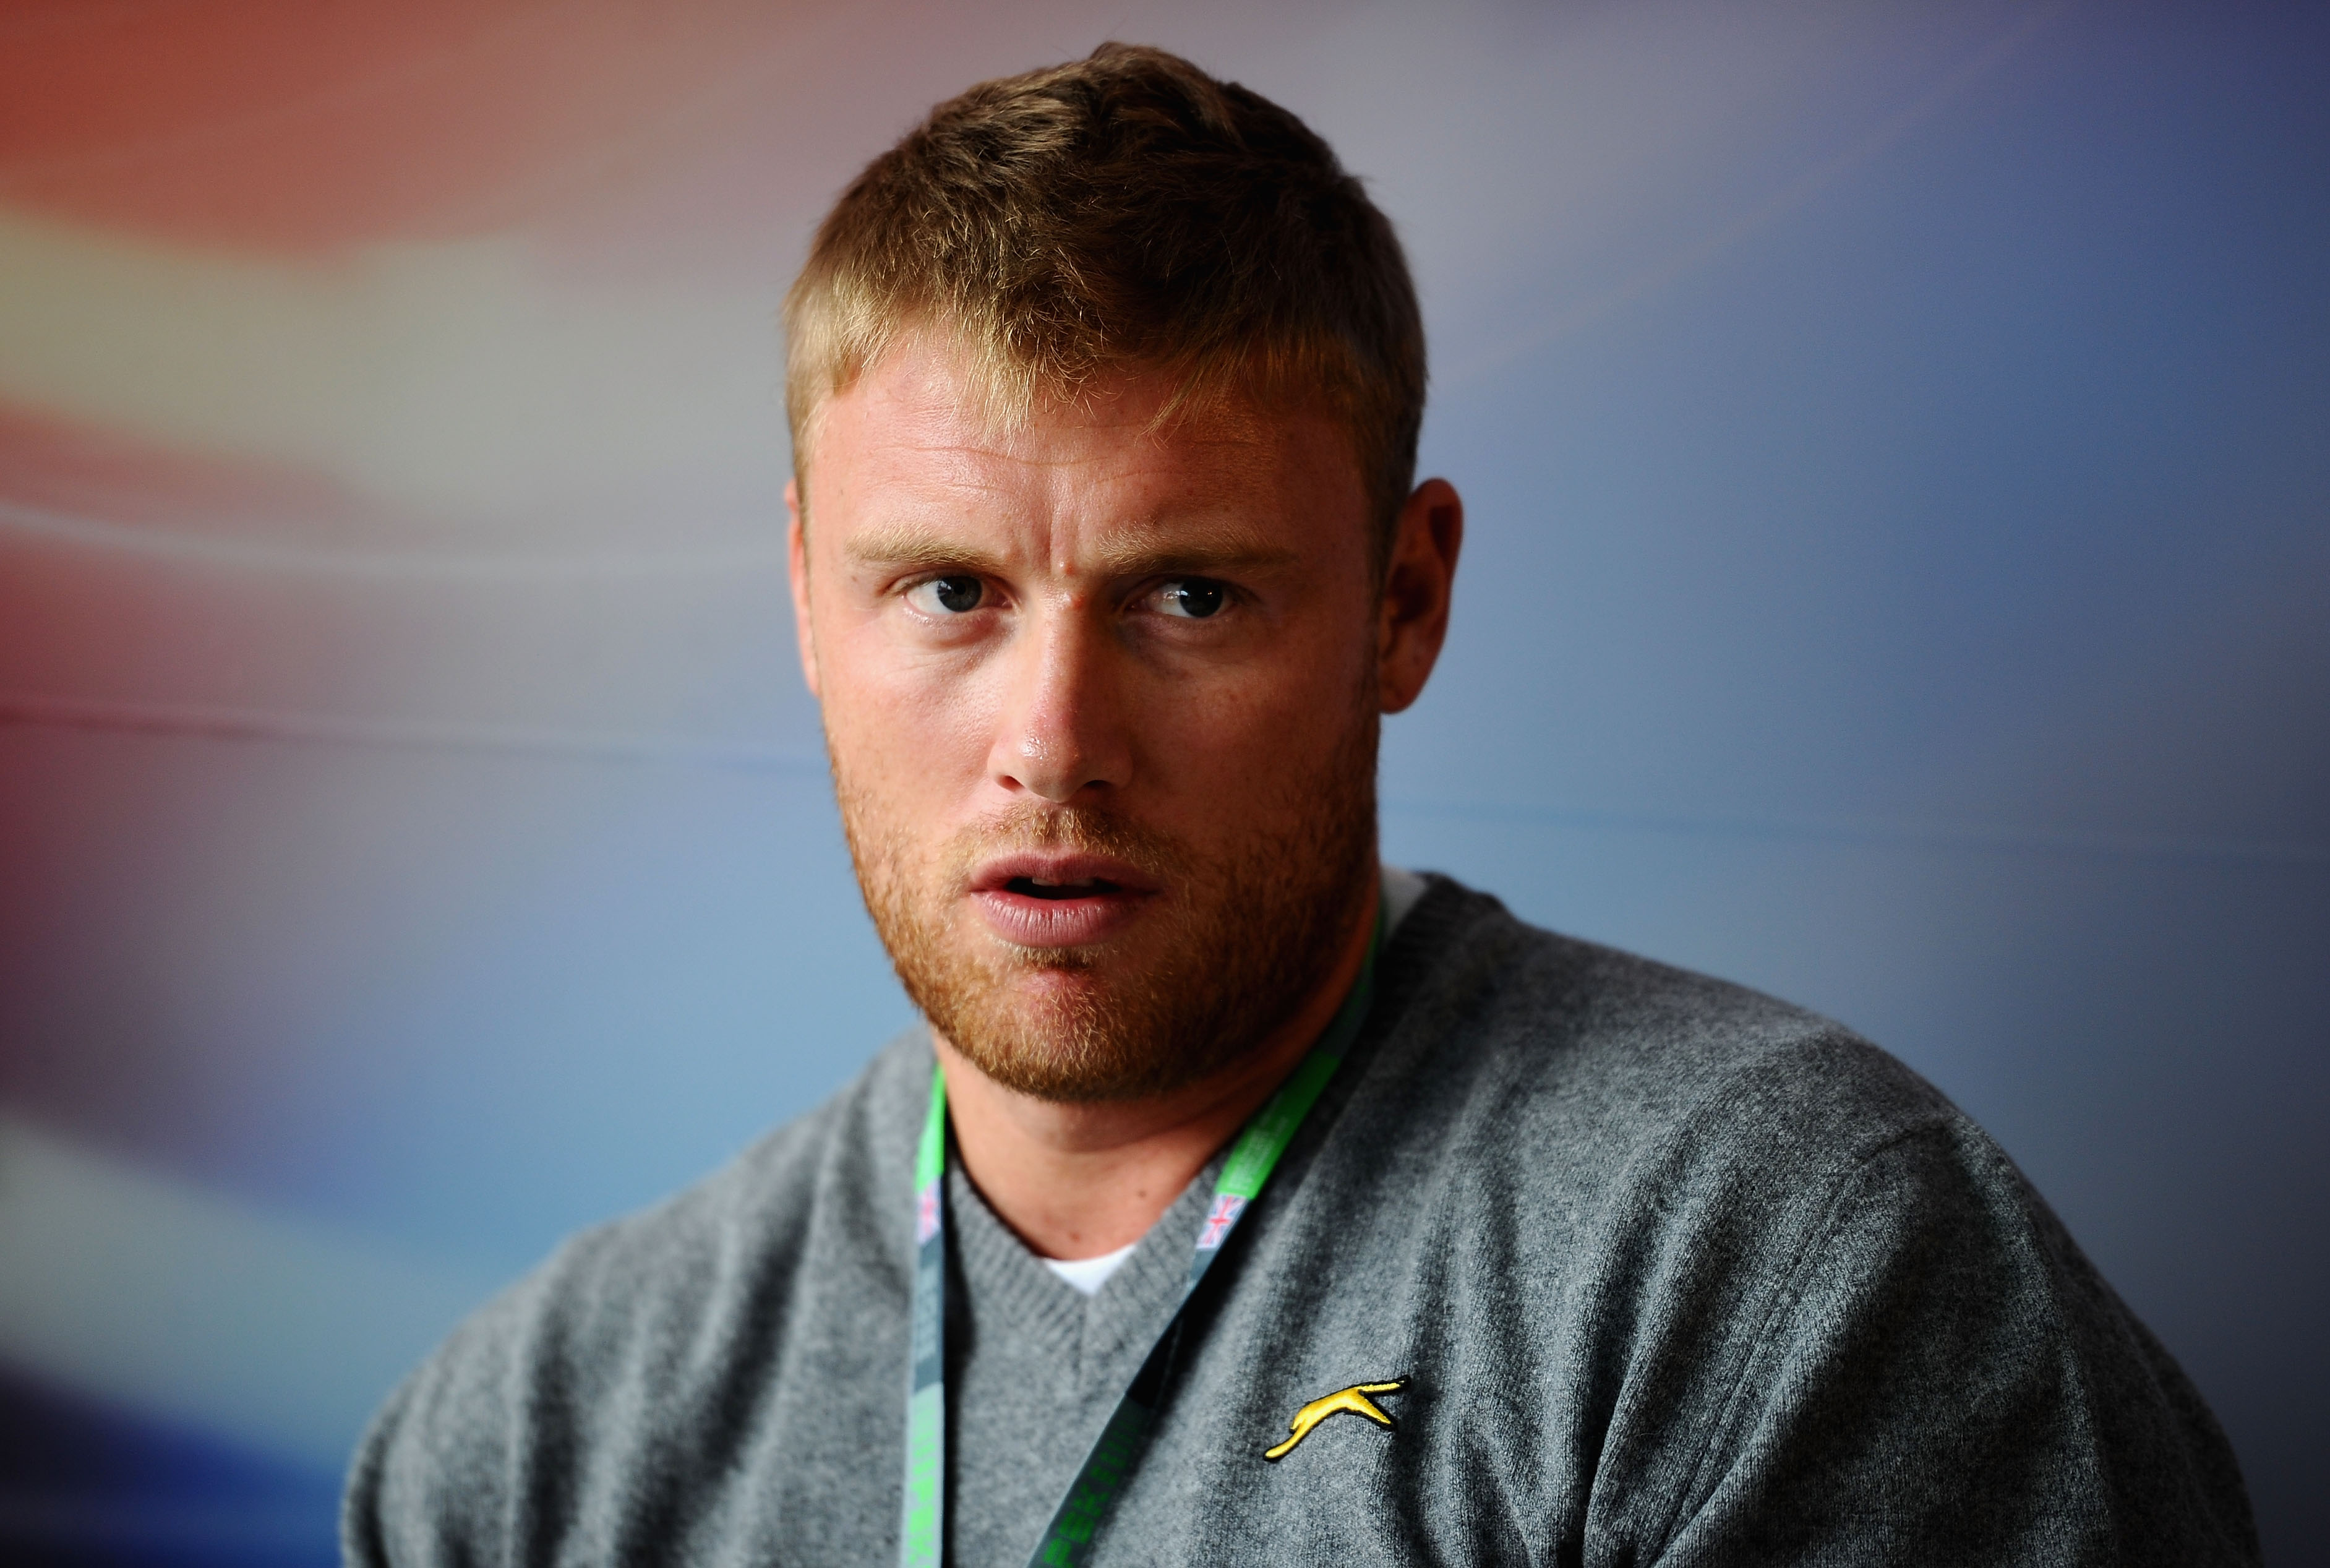 Andrew Flintoff to join England squad to ‘bowl batsmen back into form’